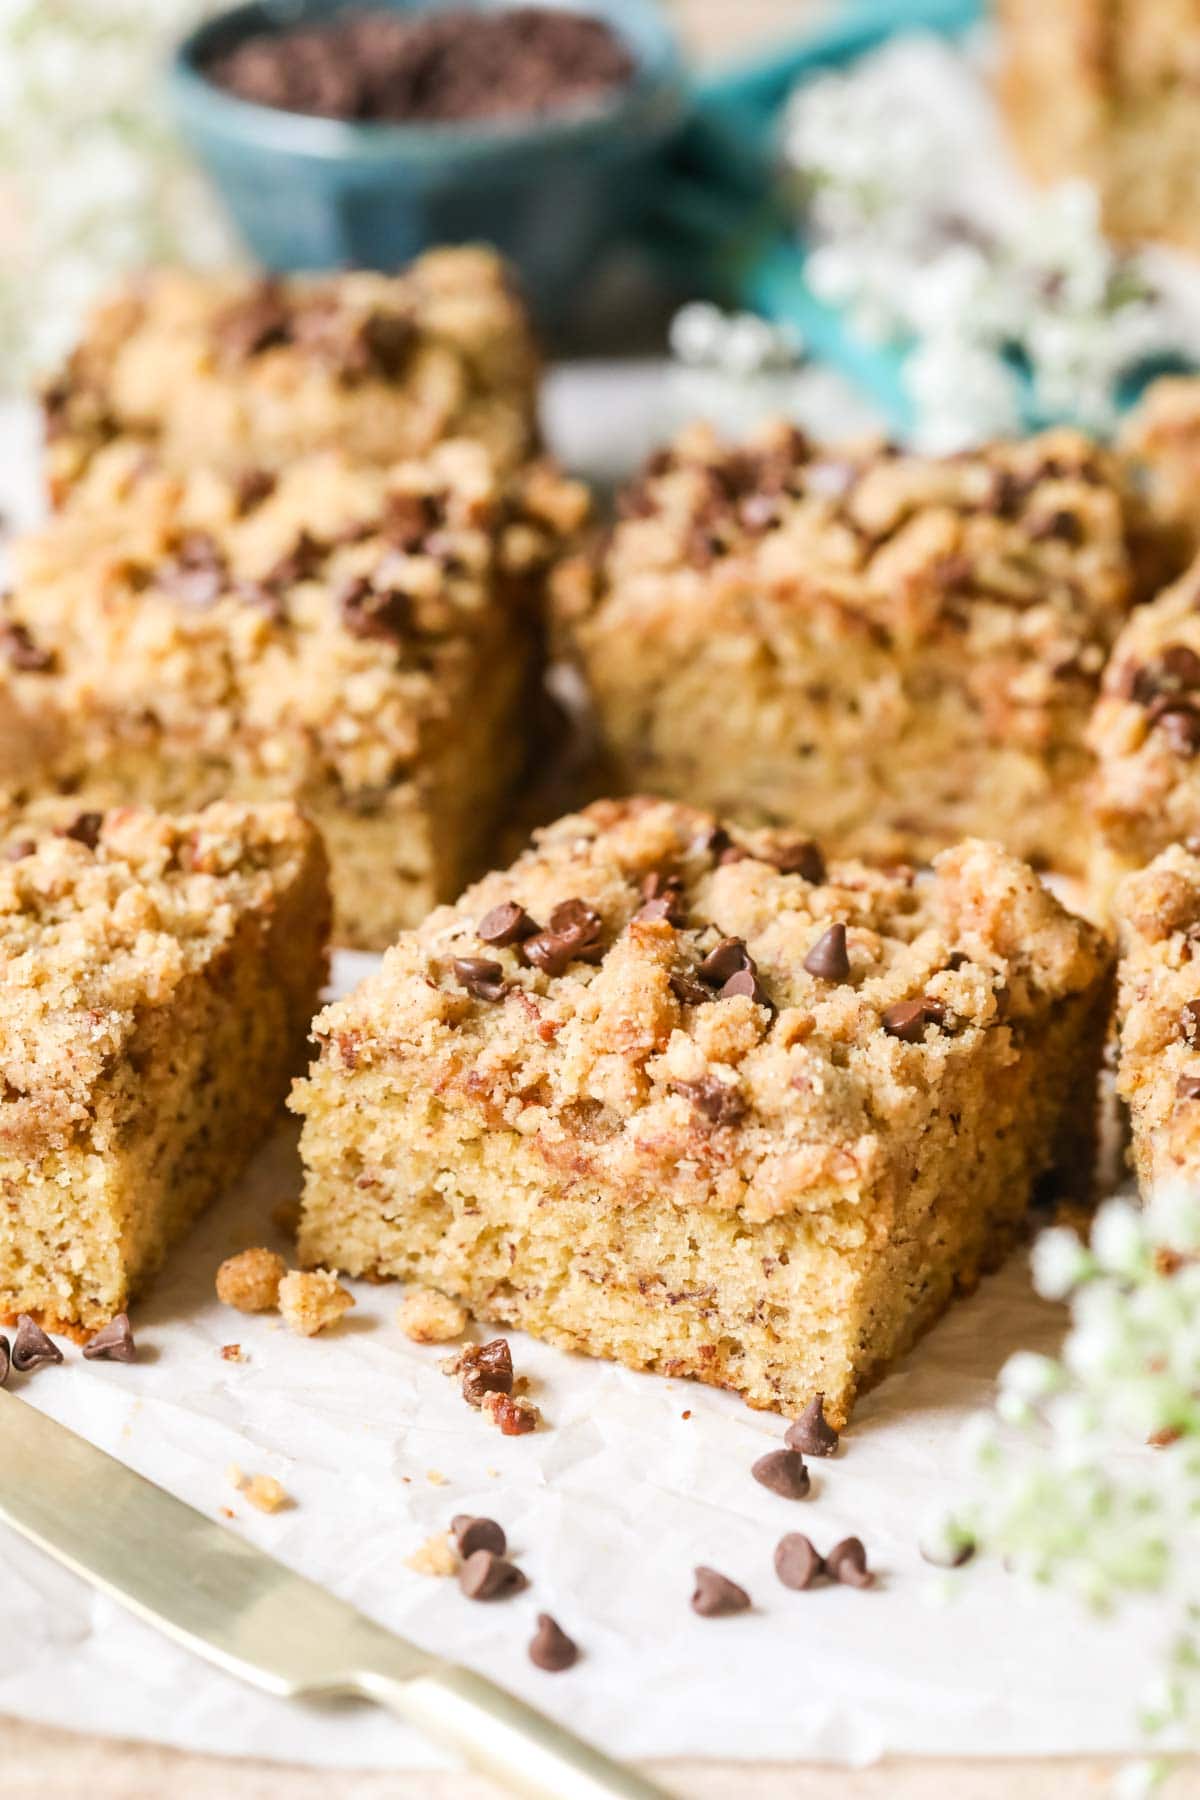 Streusel and chocolate chip topped pieces of coffee cake surrounded by mini chocolate chips.